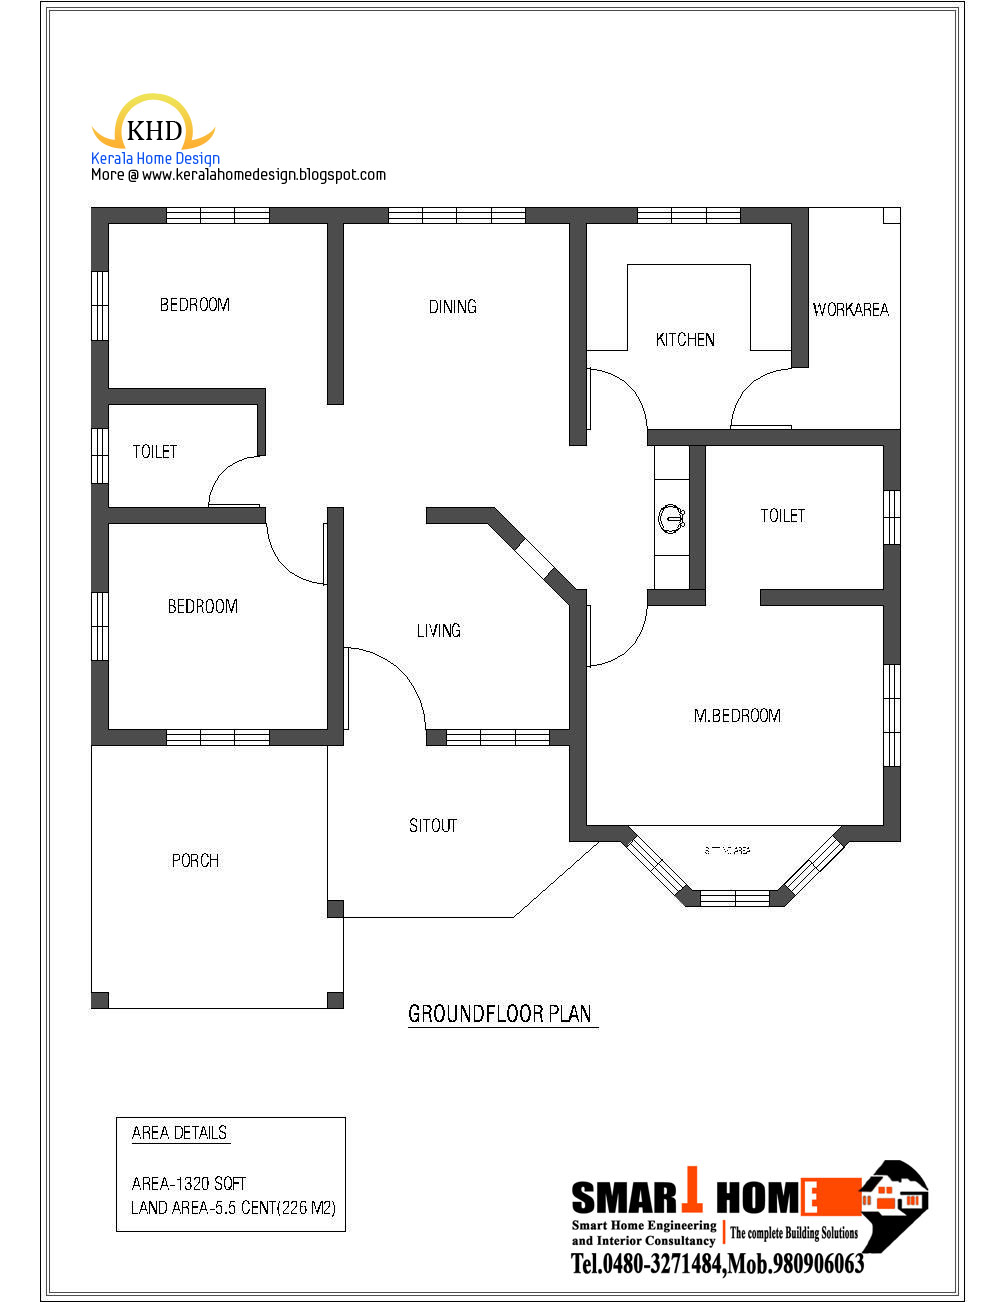 Single Floor House Plan and Elevation 1320 Sq. Ft